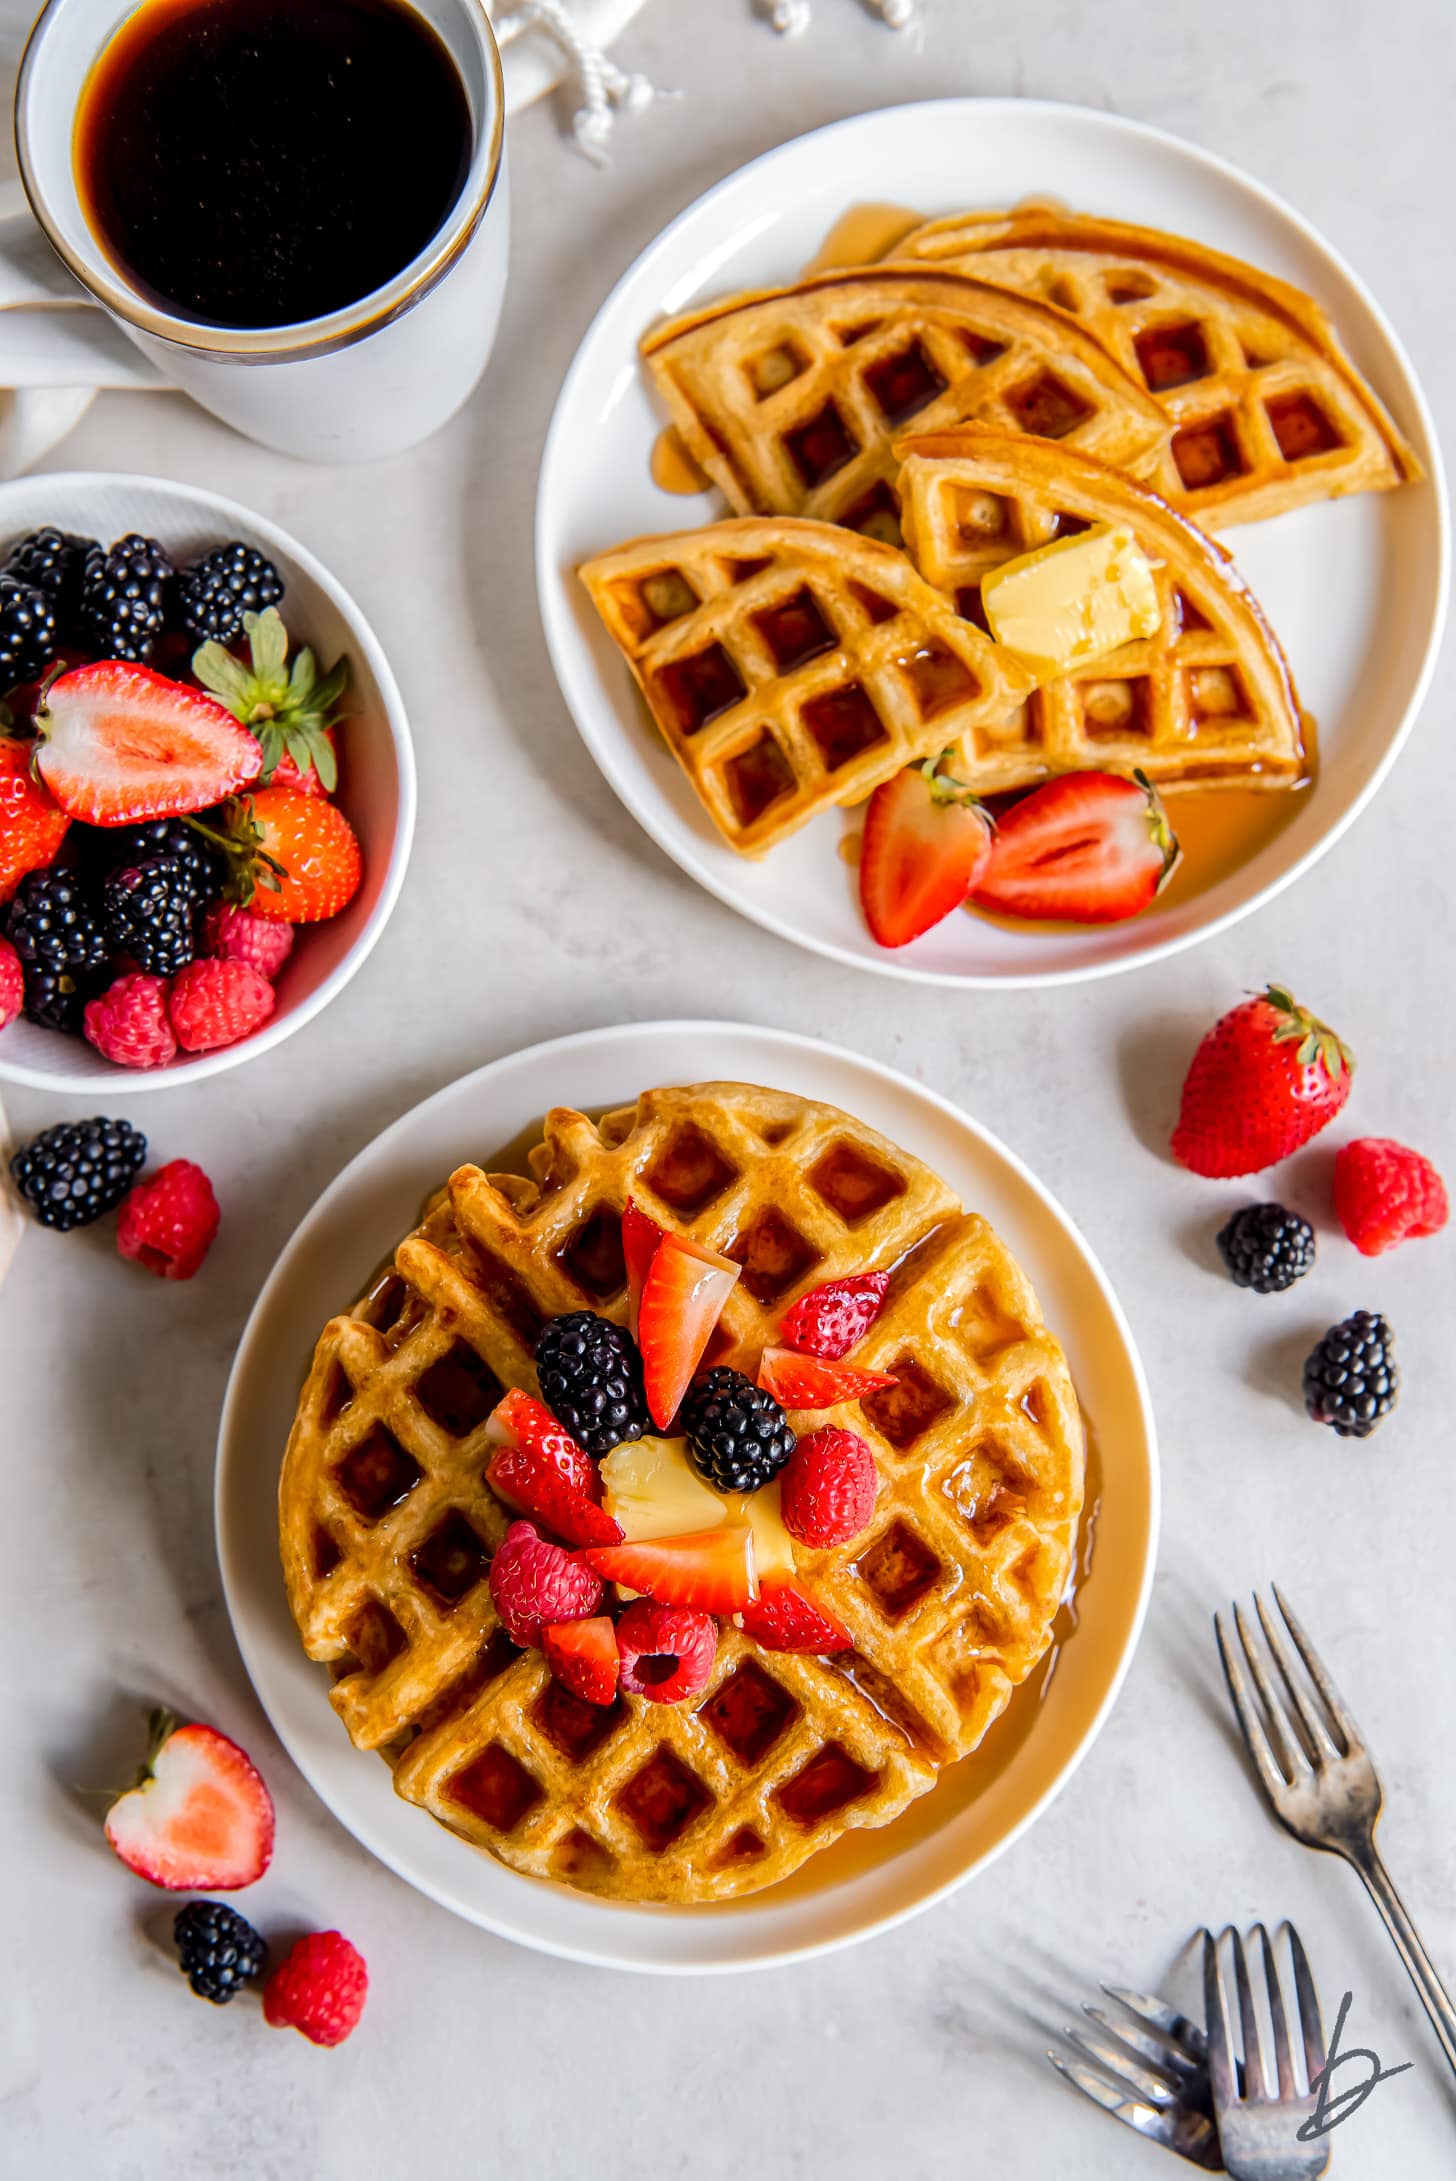 two plates with buttermilk waffles one plate with fresh fruit on waffles the other plate with triangle waffles